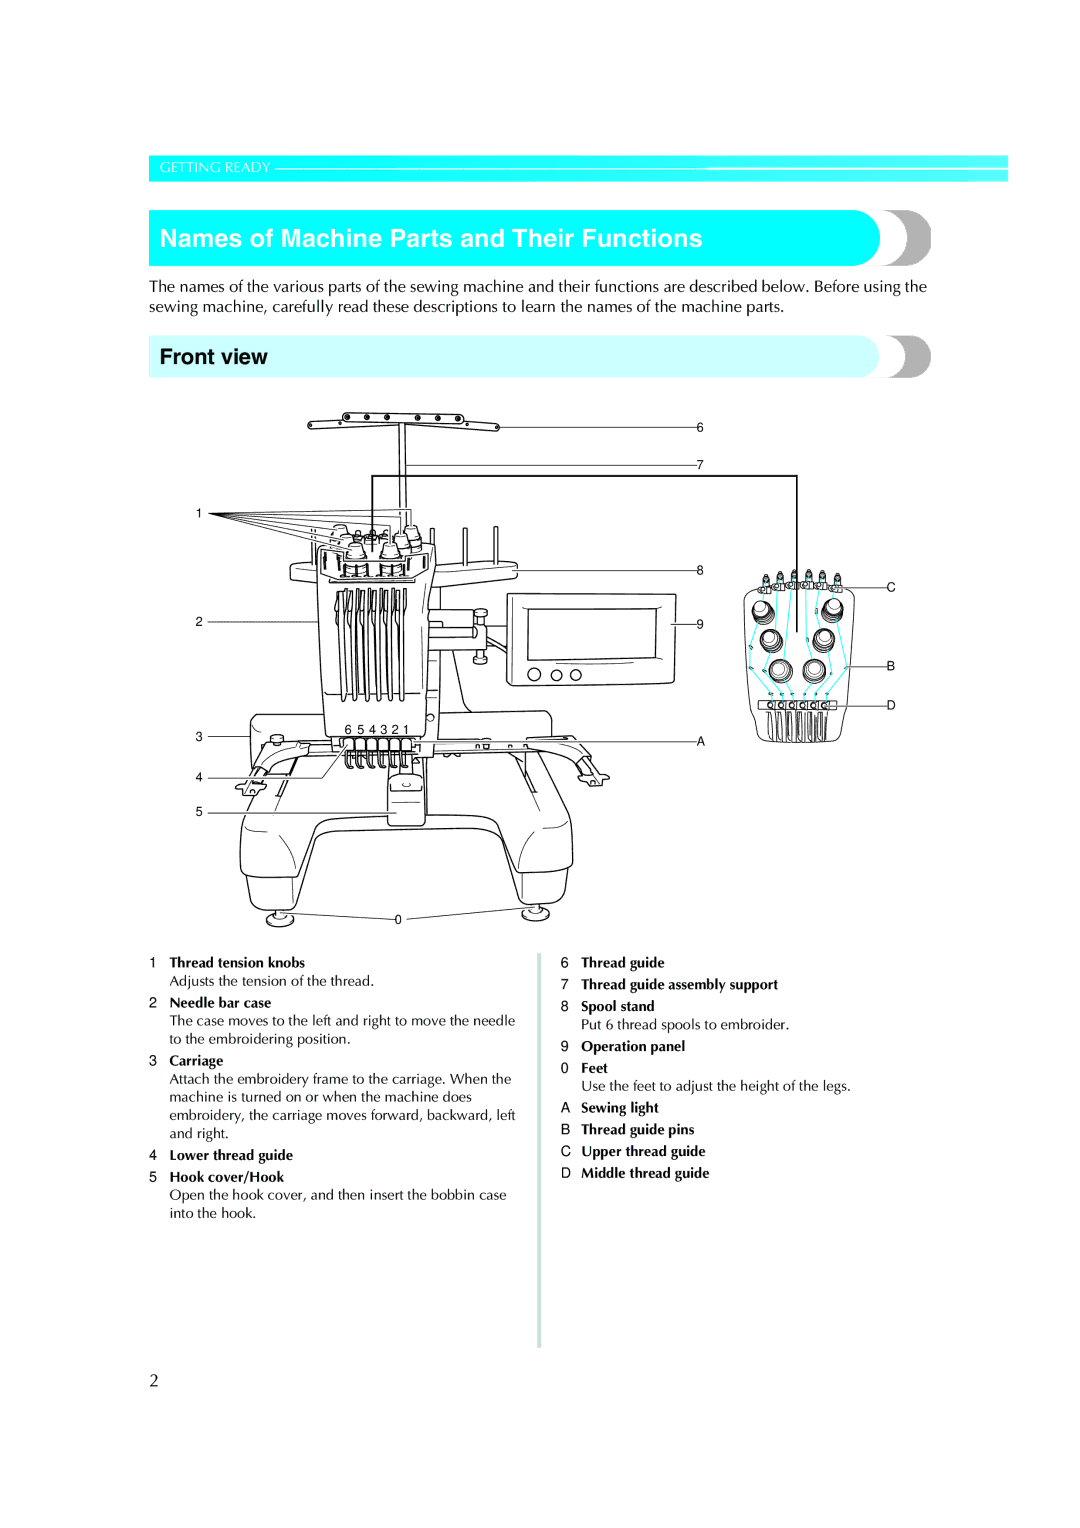 Brother PR-620 operation manual Names of Machine Parts and Their Functions, Front view 